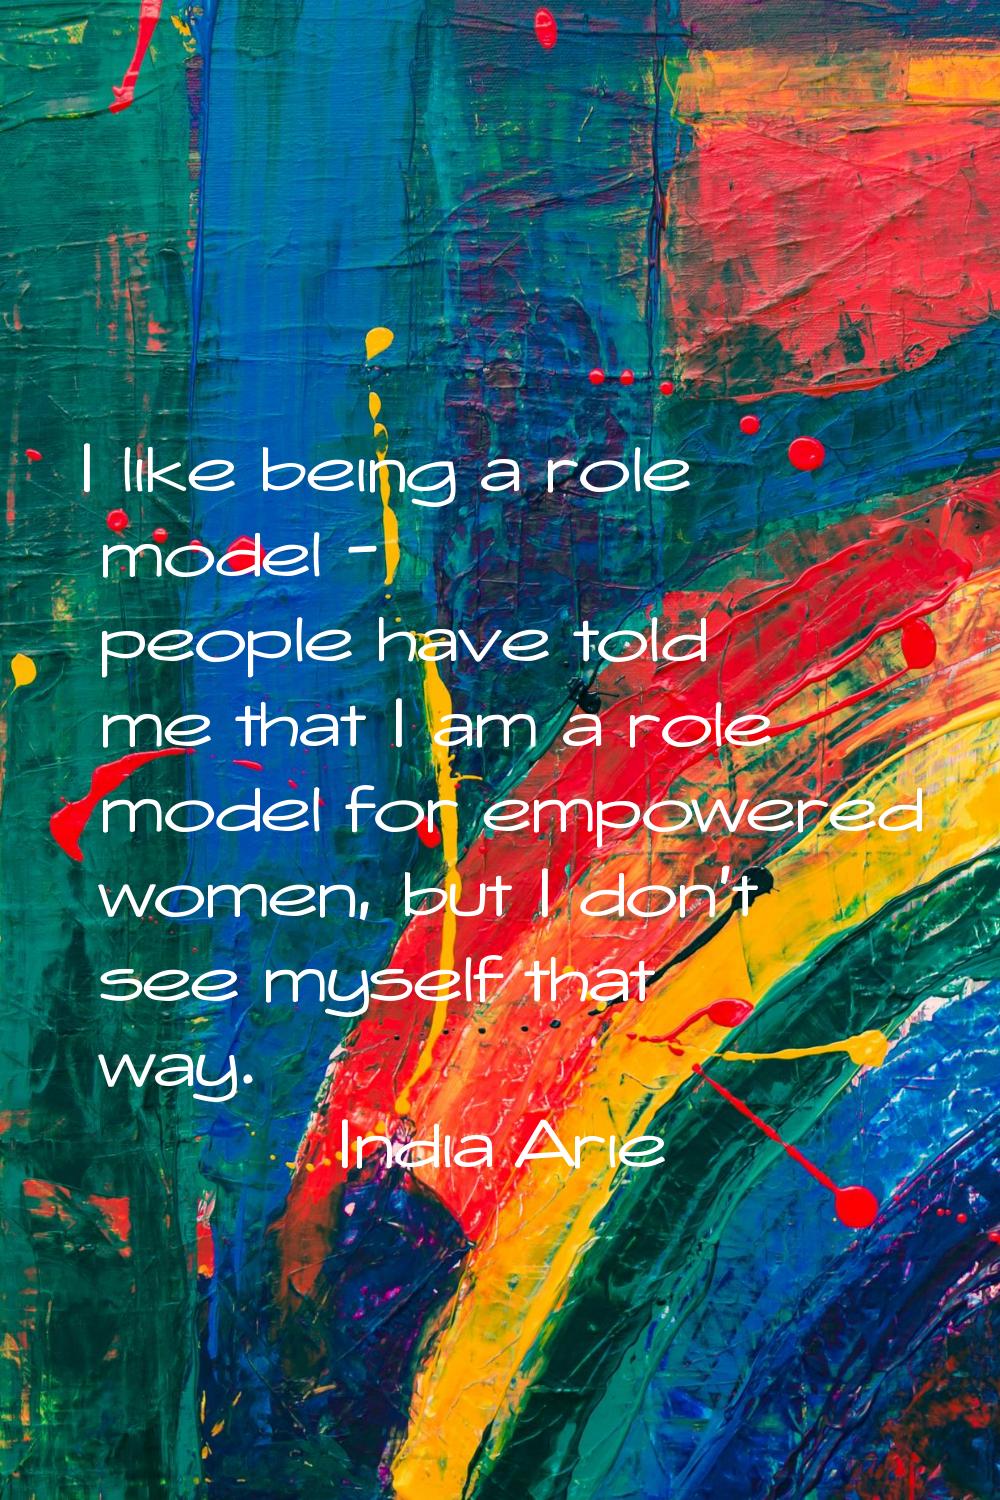 I like being a role model - people have told me that I am a role model for empowered women, but I d